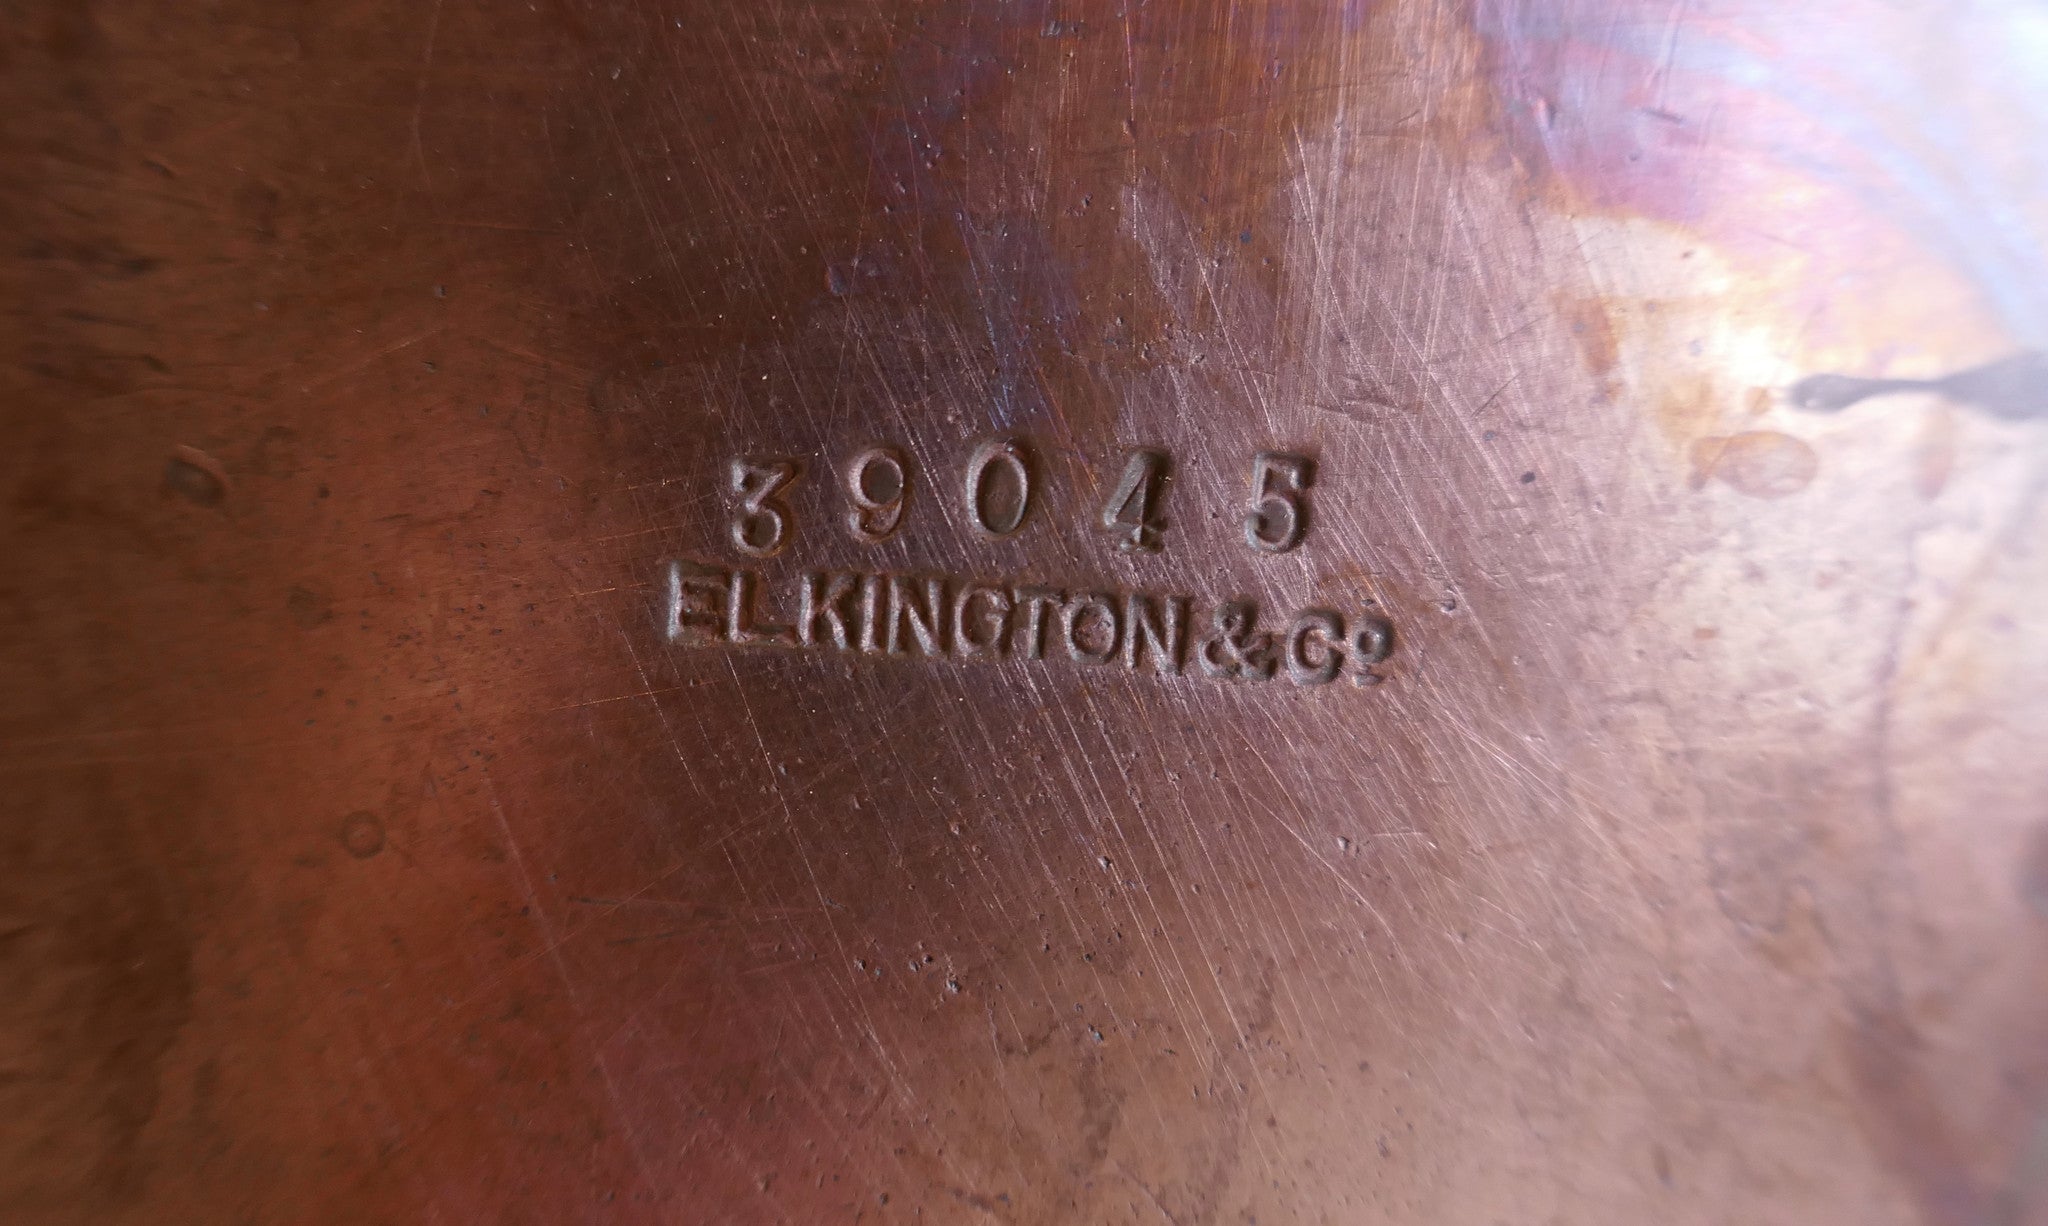 X Collection of Copper Pans